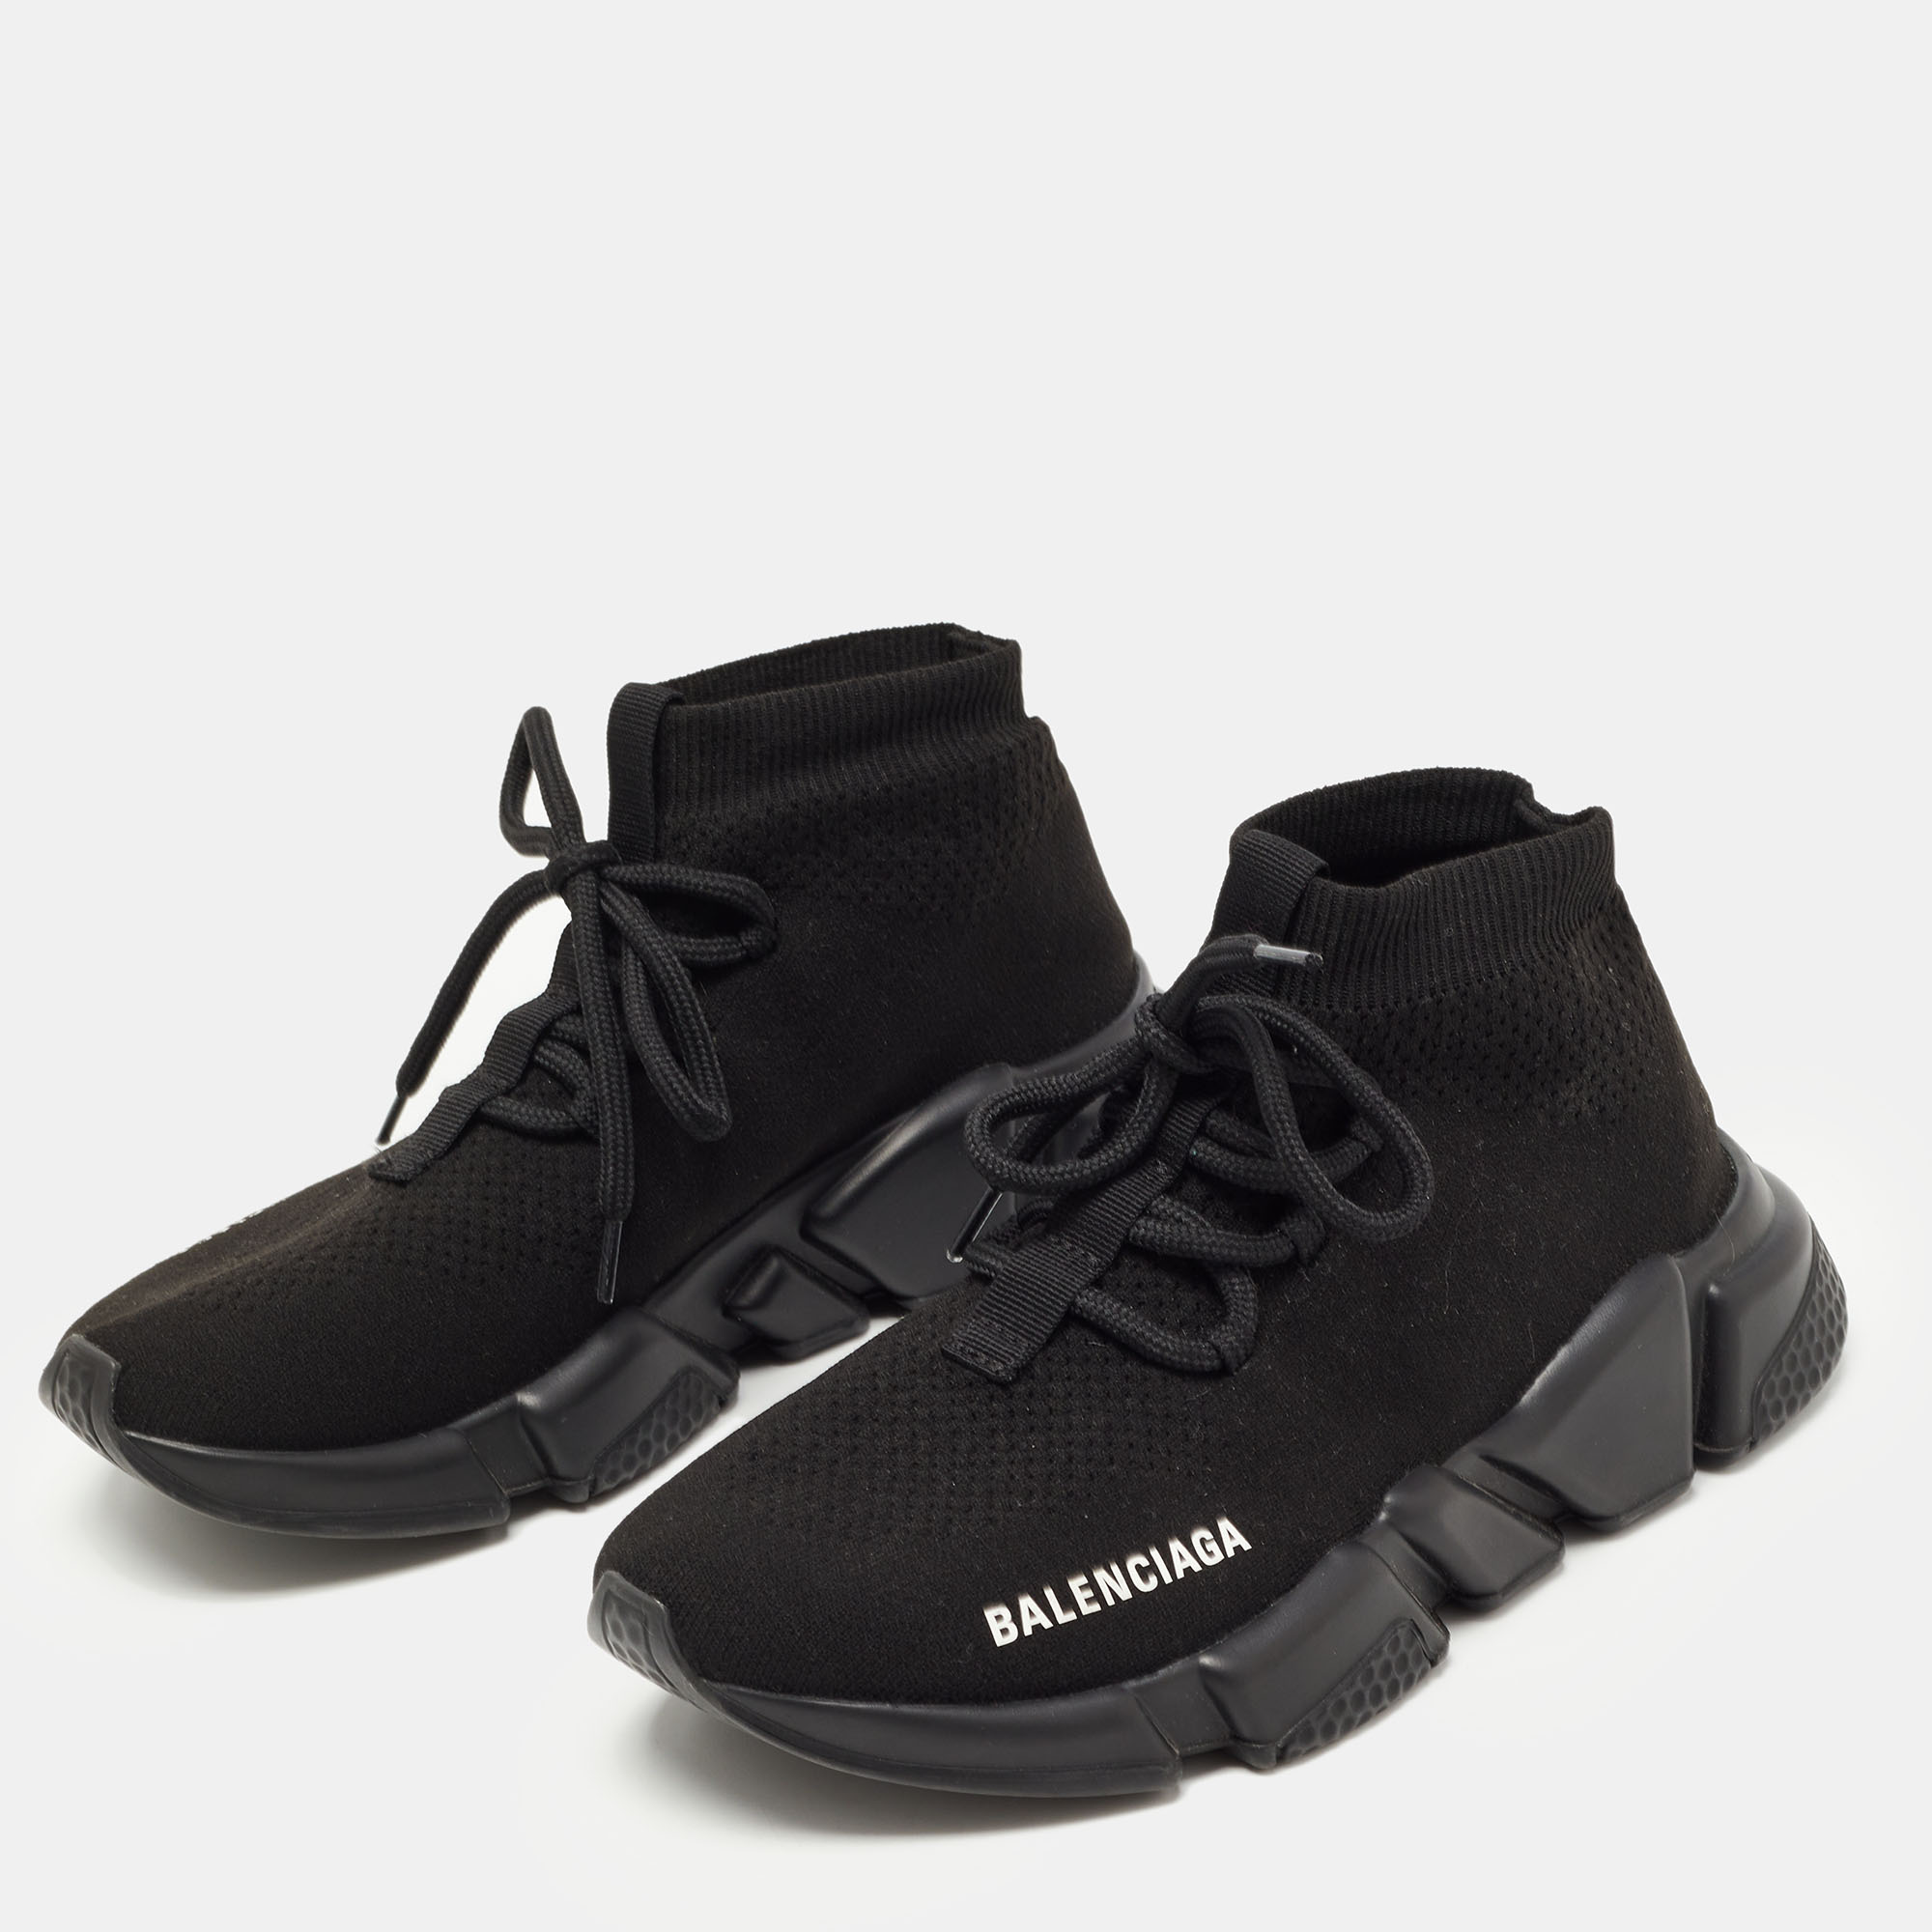 

Balenciaga Black Knit Fabric Speed Trainer Lace Up Sneakers Size